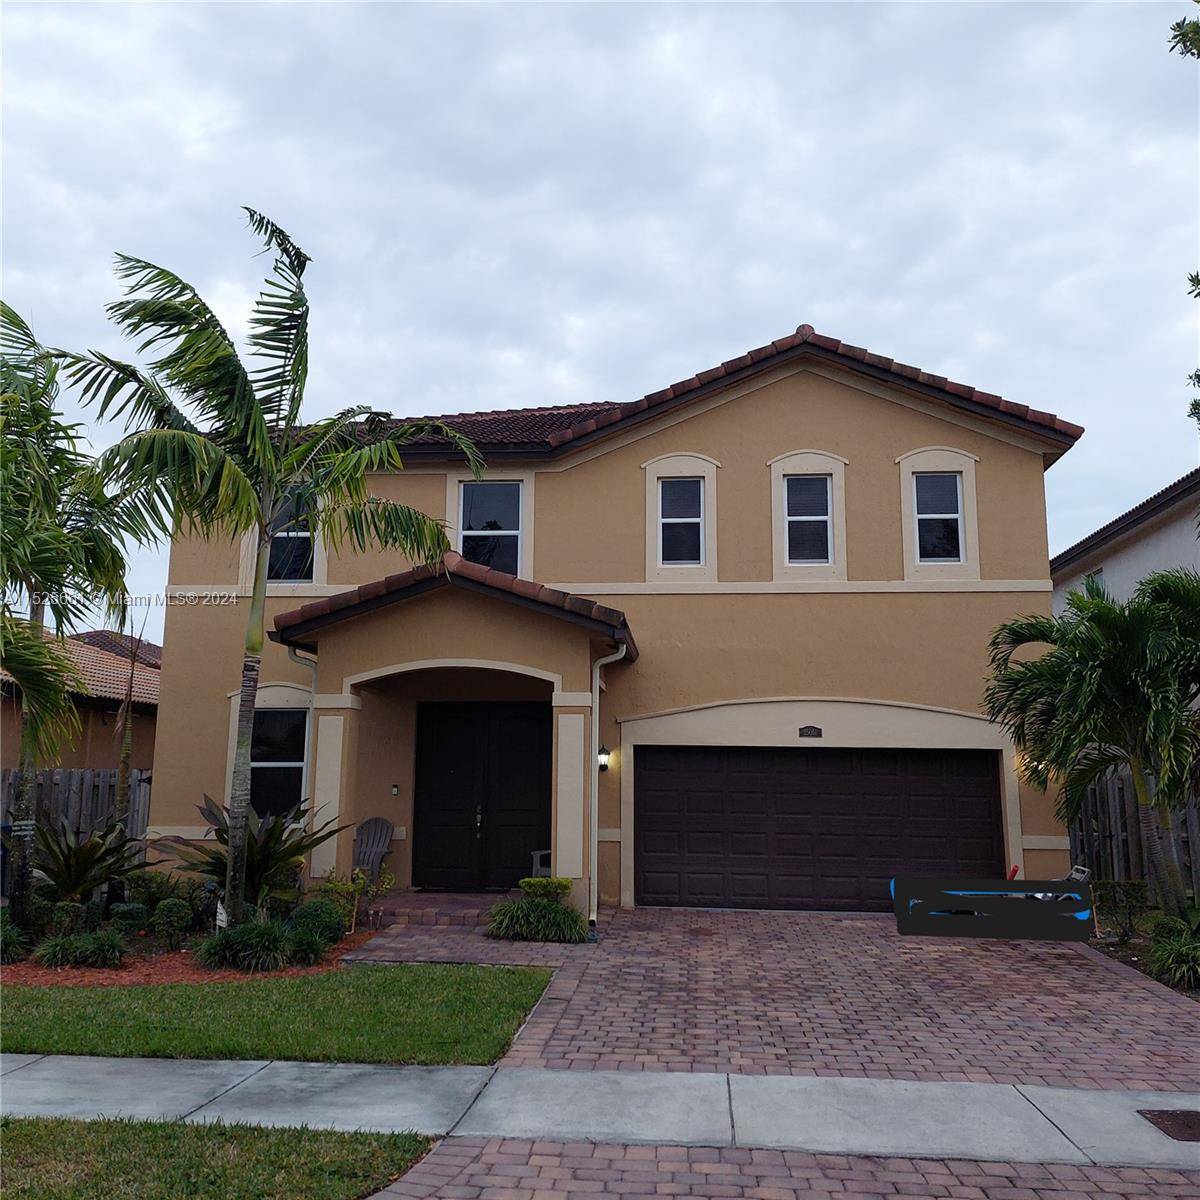 Spacious 5 bedroom, 3 bath home with a 2 car garage with in law quarters in the beautiful suburbs of Miami in Southwest Miami Dade County close to Homestead.